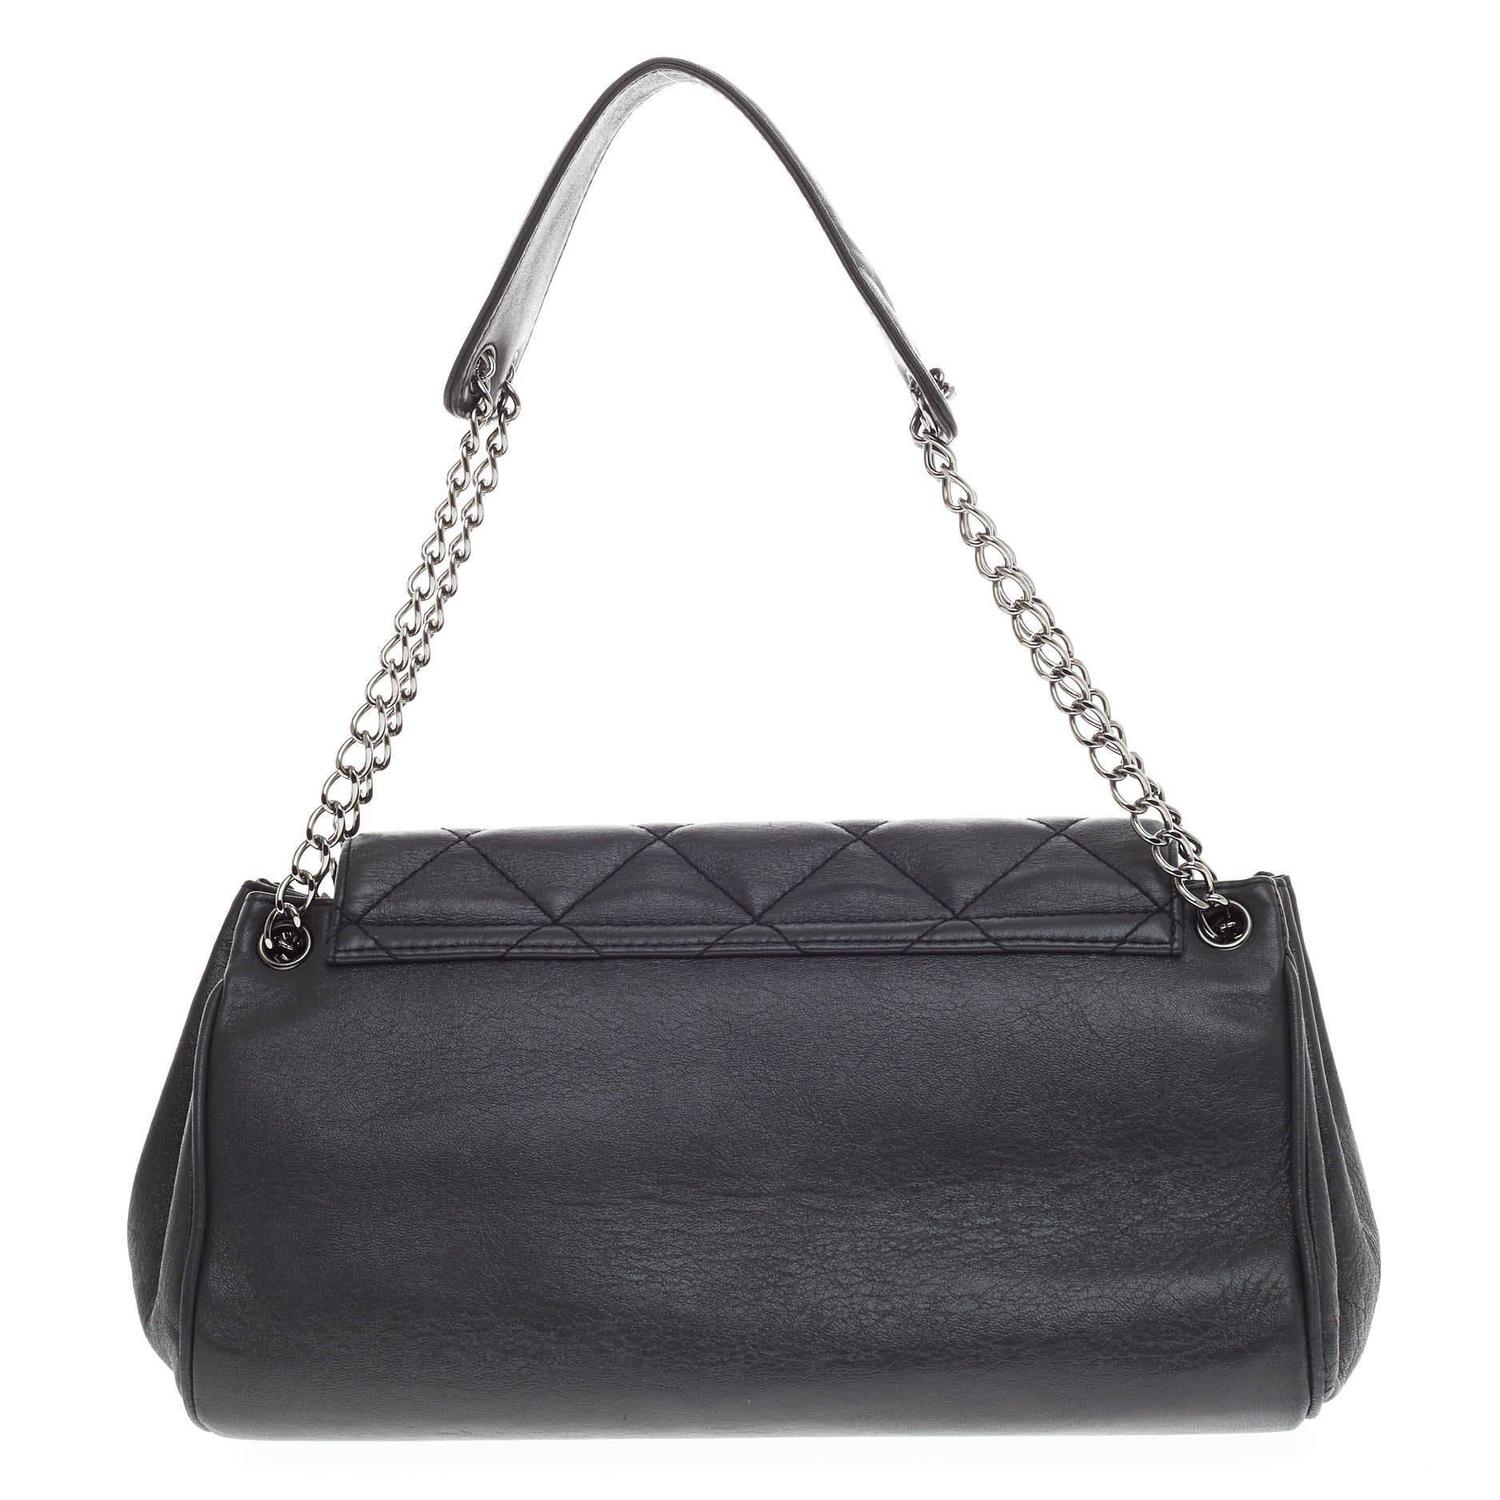 Chanel Accordion Push Lock Flap Bag Quilted Leather Medium at 1stdibs